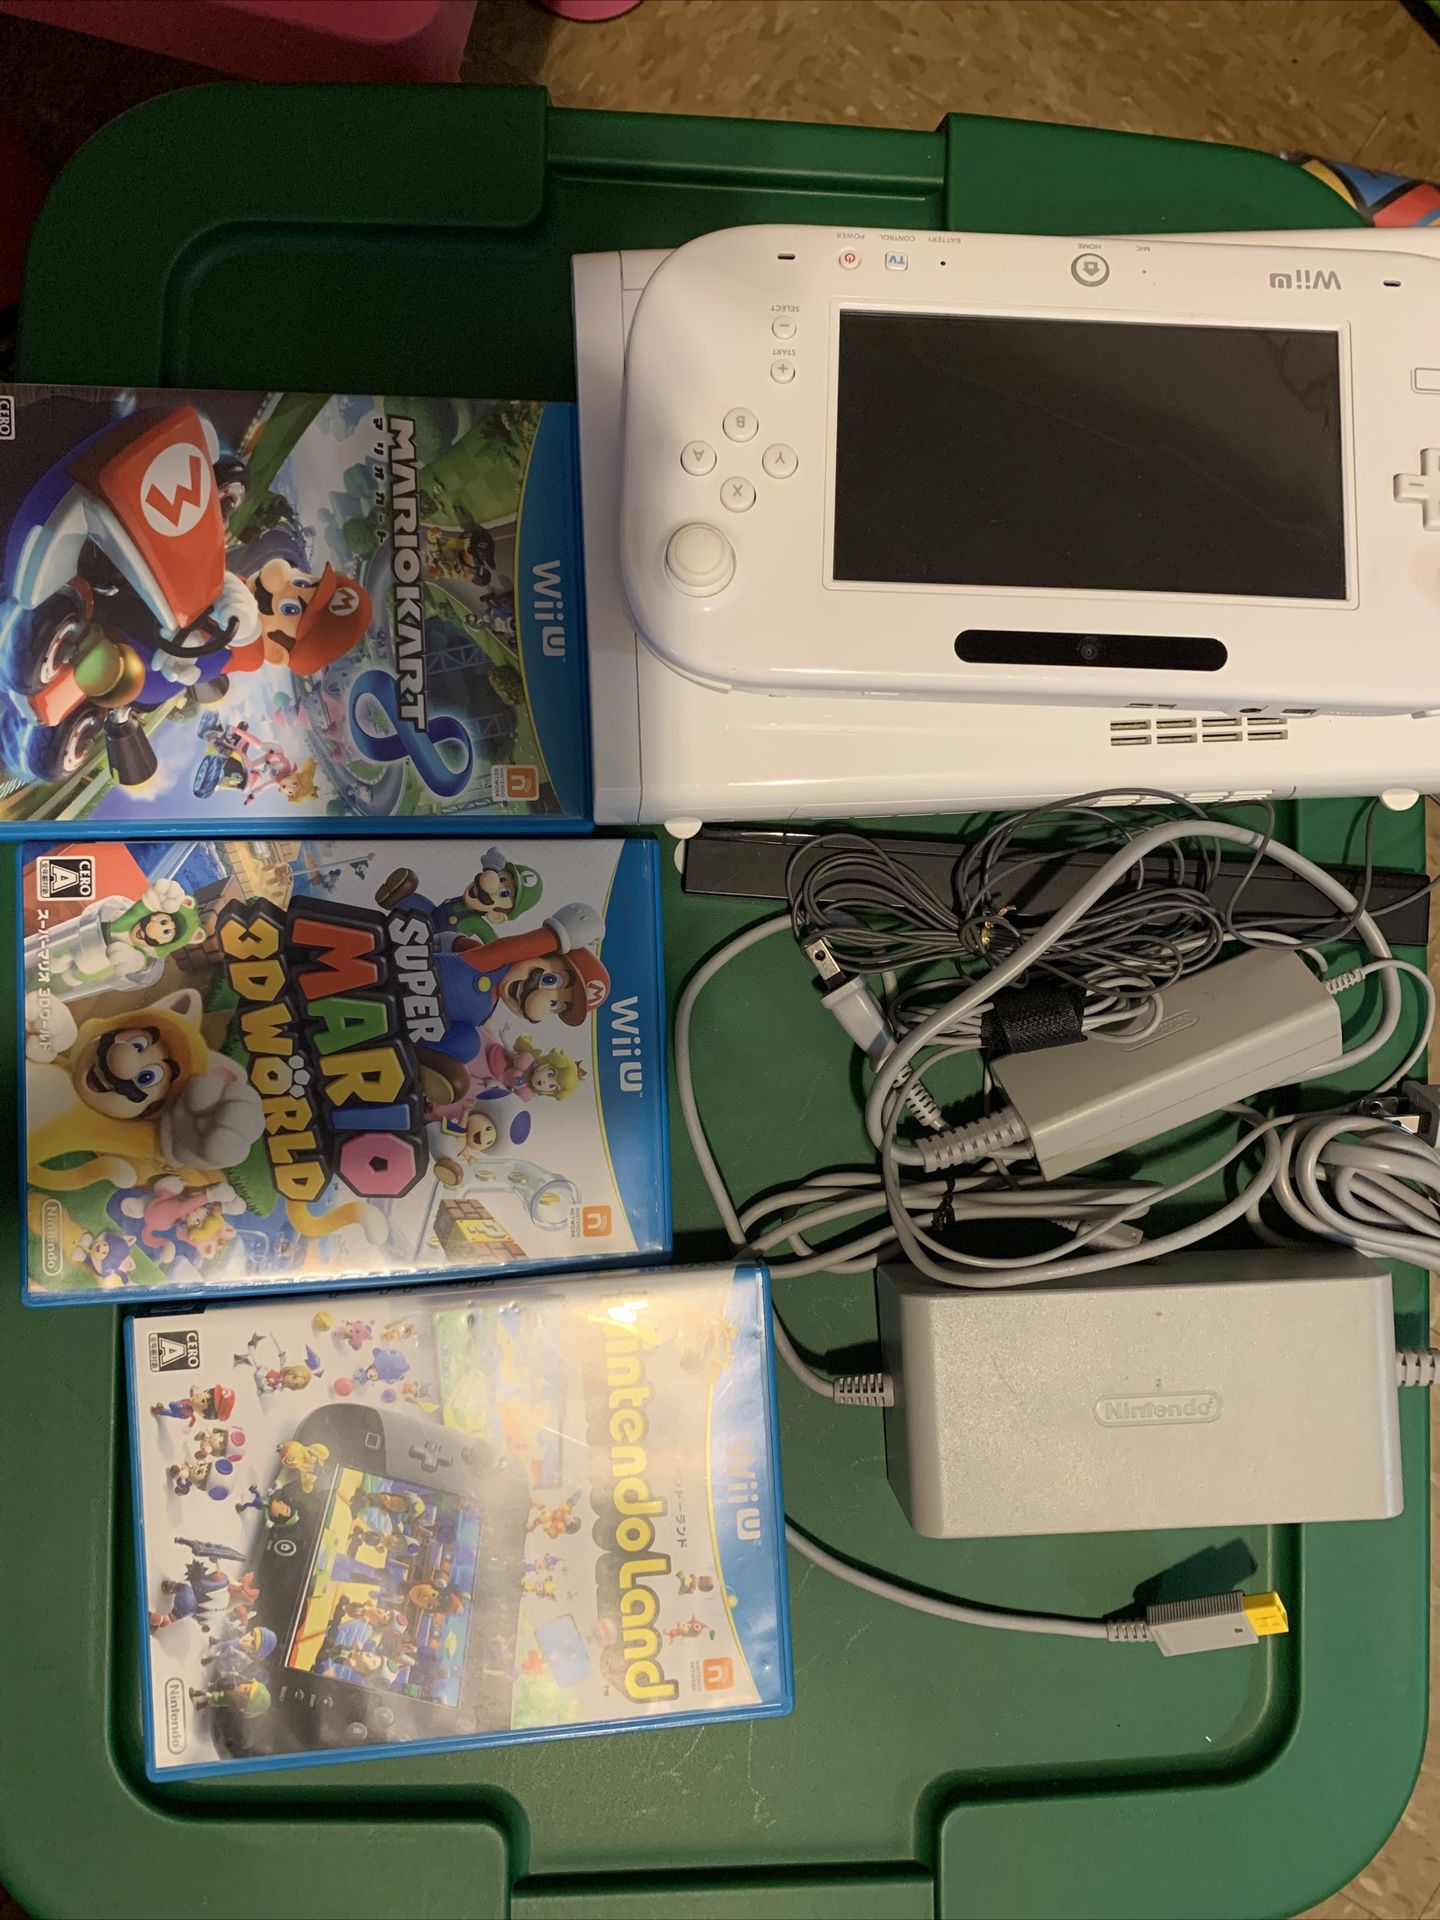 Nintendo Wii Used Comes With Games-As Is.. for Sale in Bronx, NY